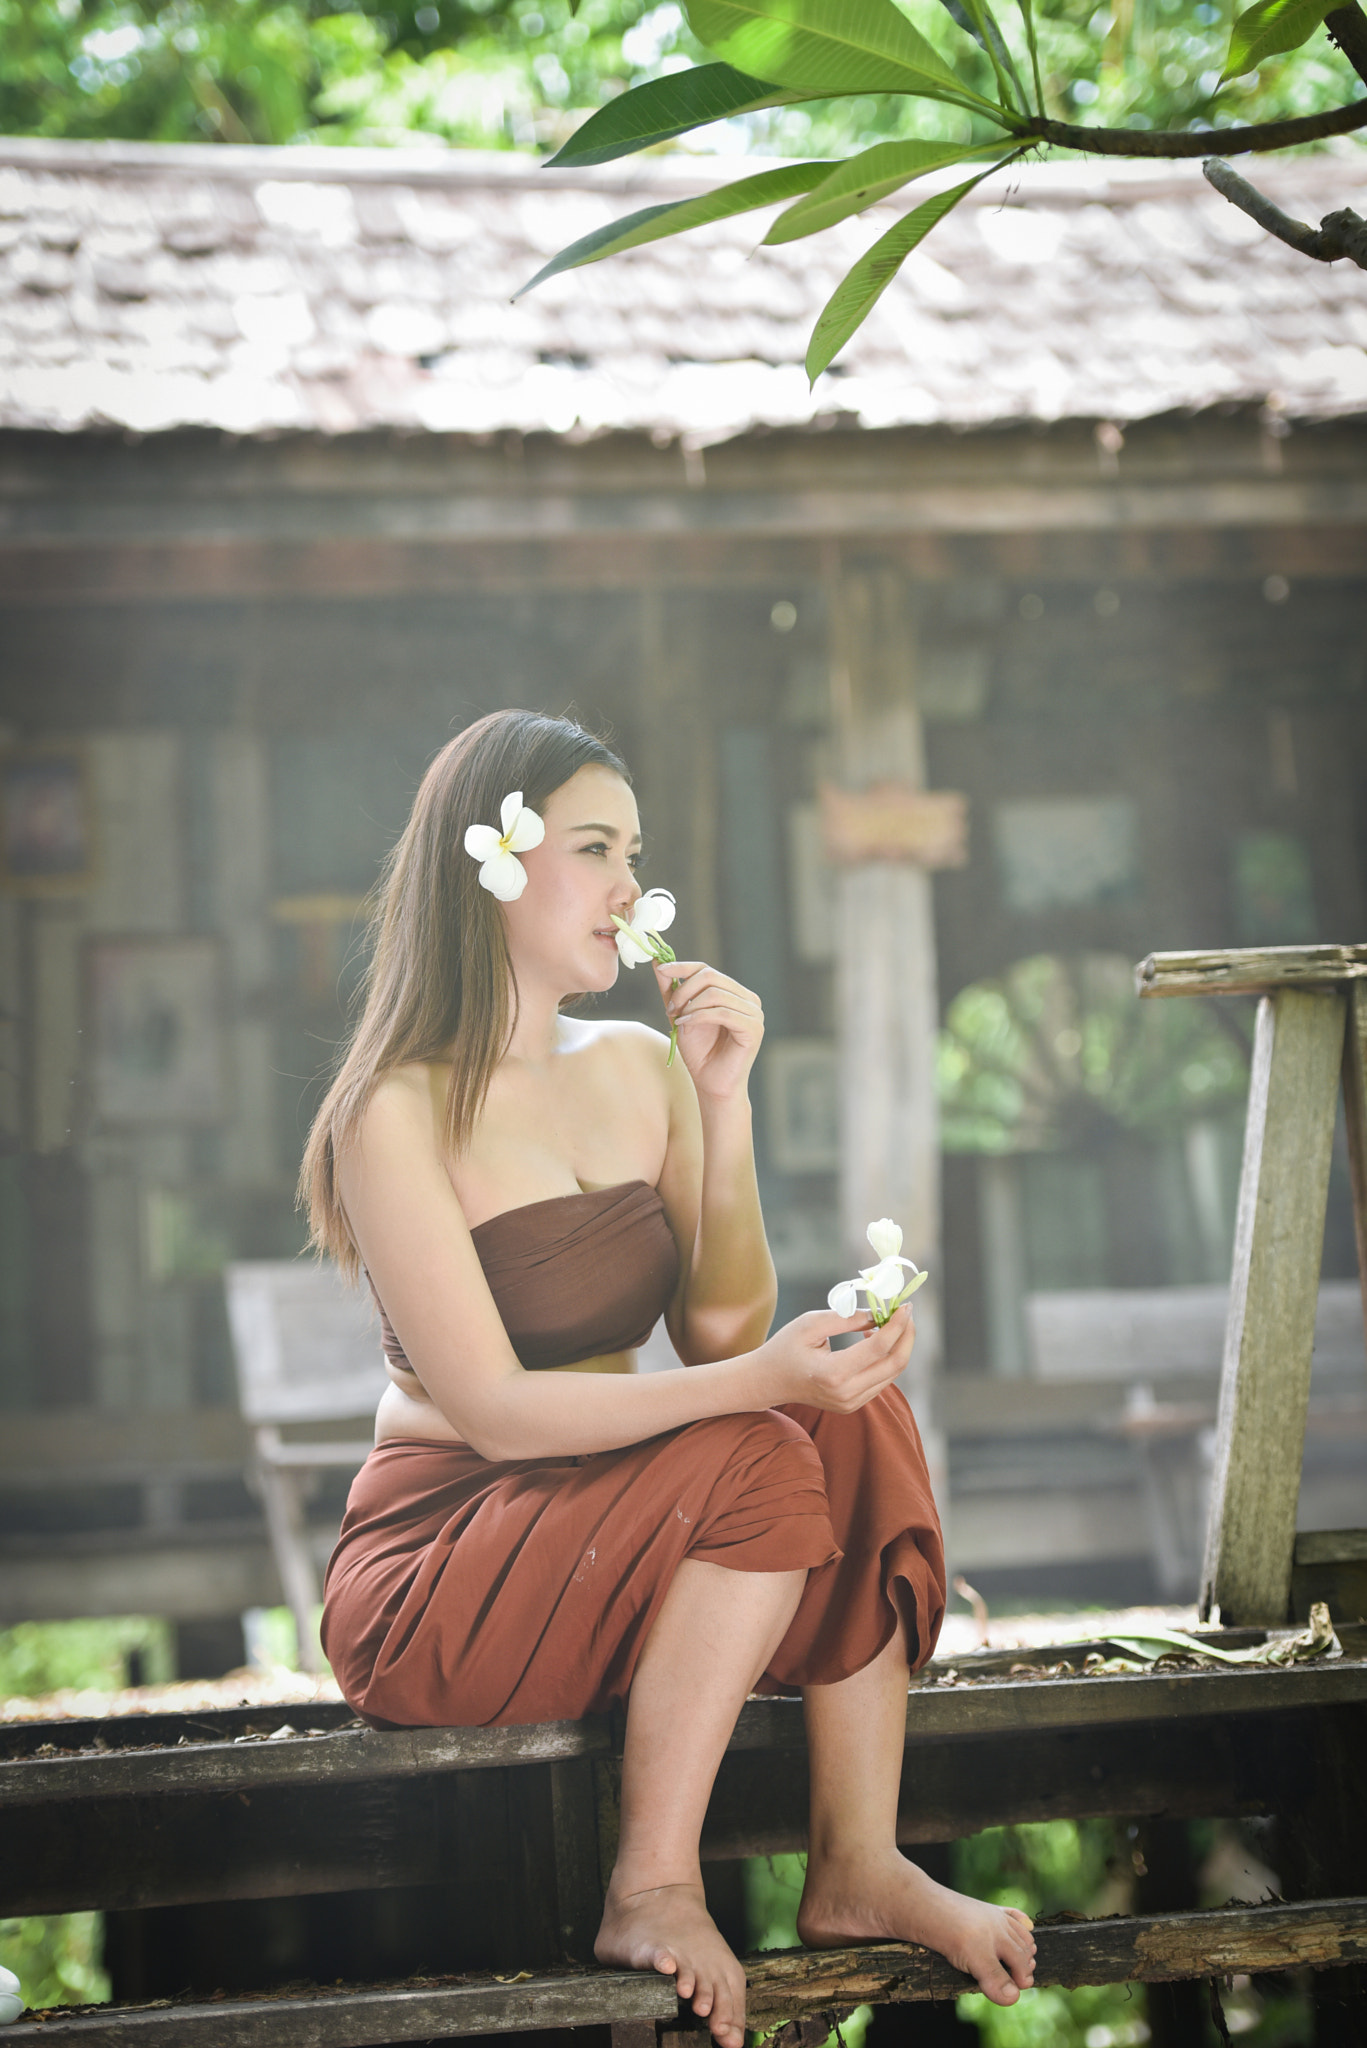 Asia woman thai drama style dress and Sniffing flowers / Portrai